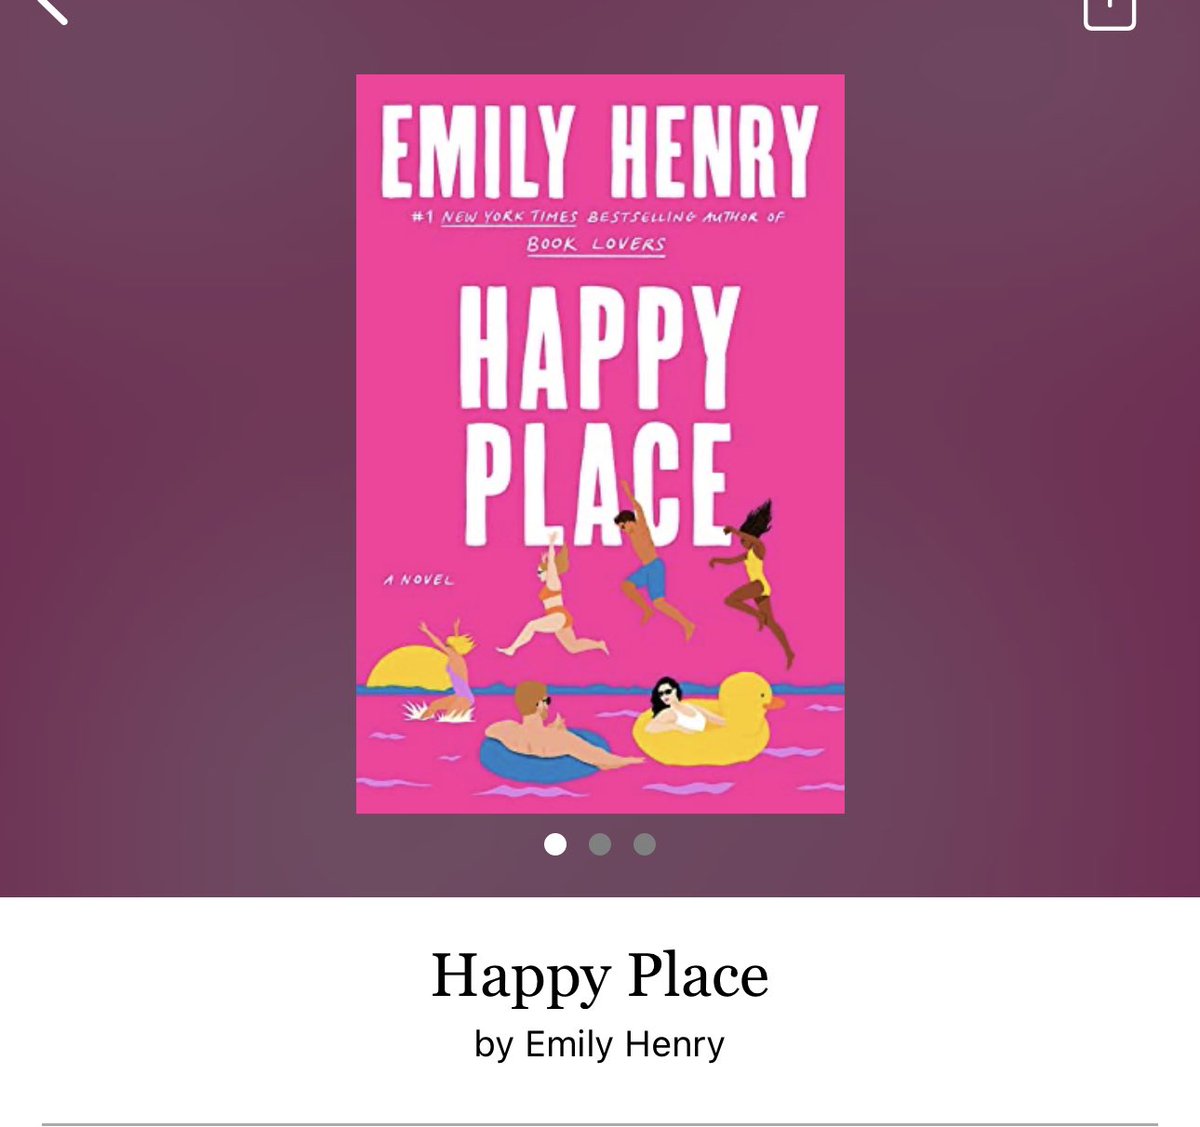 Happy Place by Emily Henry  
 
#HappyPlace by #EmilyHenry #4934 #40chapters #400pages #may2023 #477of400 #NewRelease #book #64for16 #KnottsHarborMaine #HarriettAndWyn #LoveAndLoss #clearingoffreadingshelves #whatsNext #readitquick